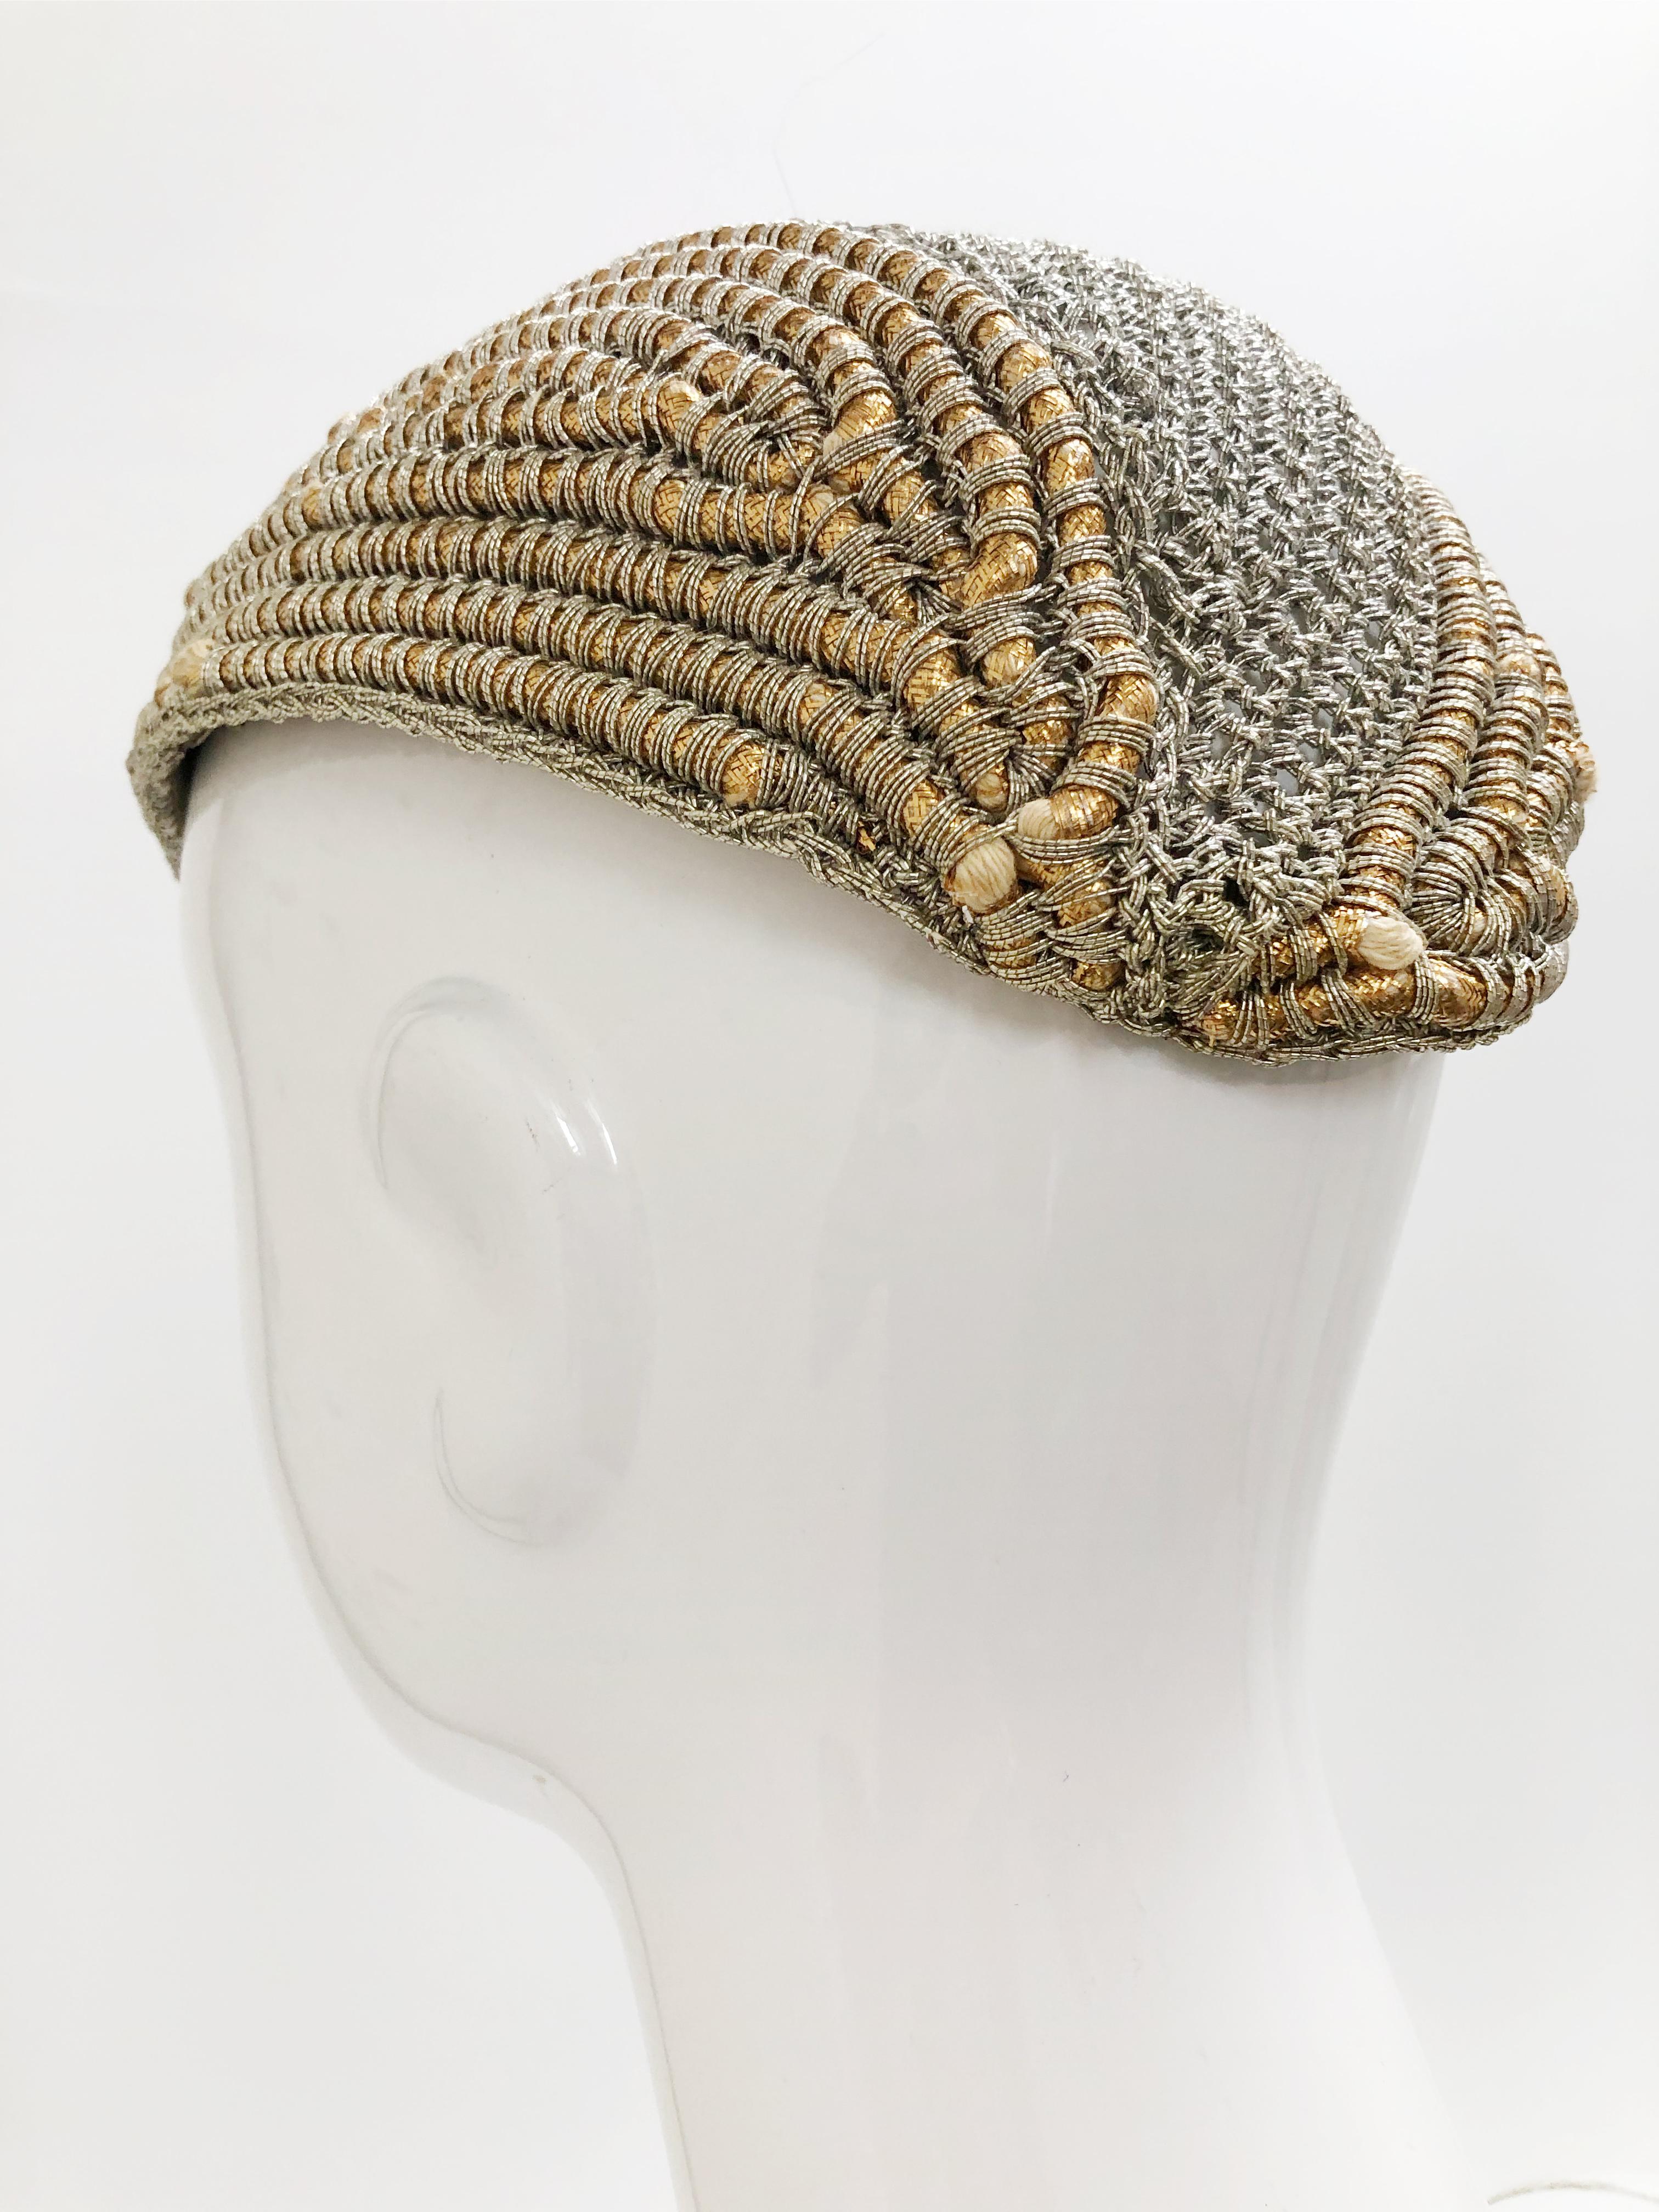 1940s John Frederics custom designed crochet metallic silver and gold cord hat with openwork at crown. This close fitting evening hat is quite unusual! Size Medium. 